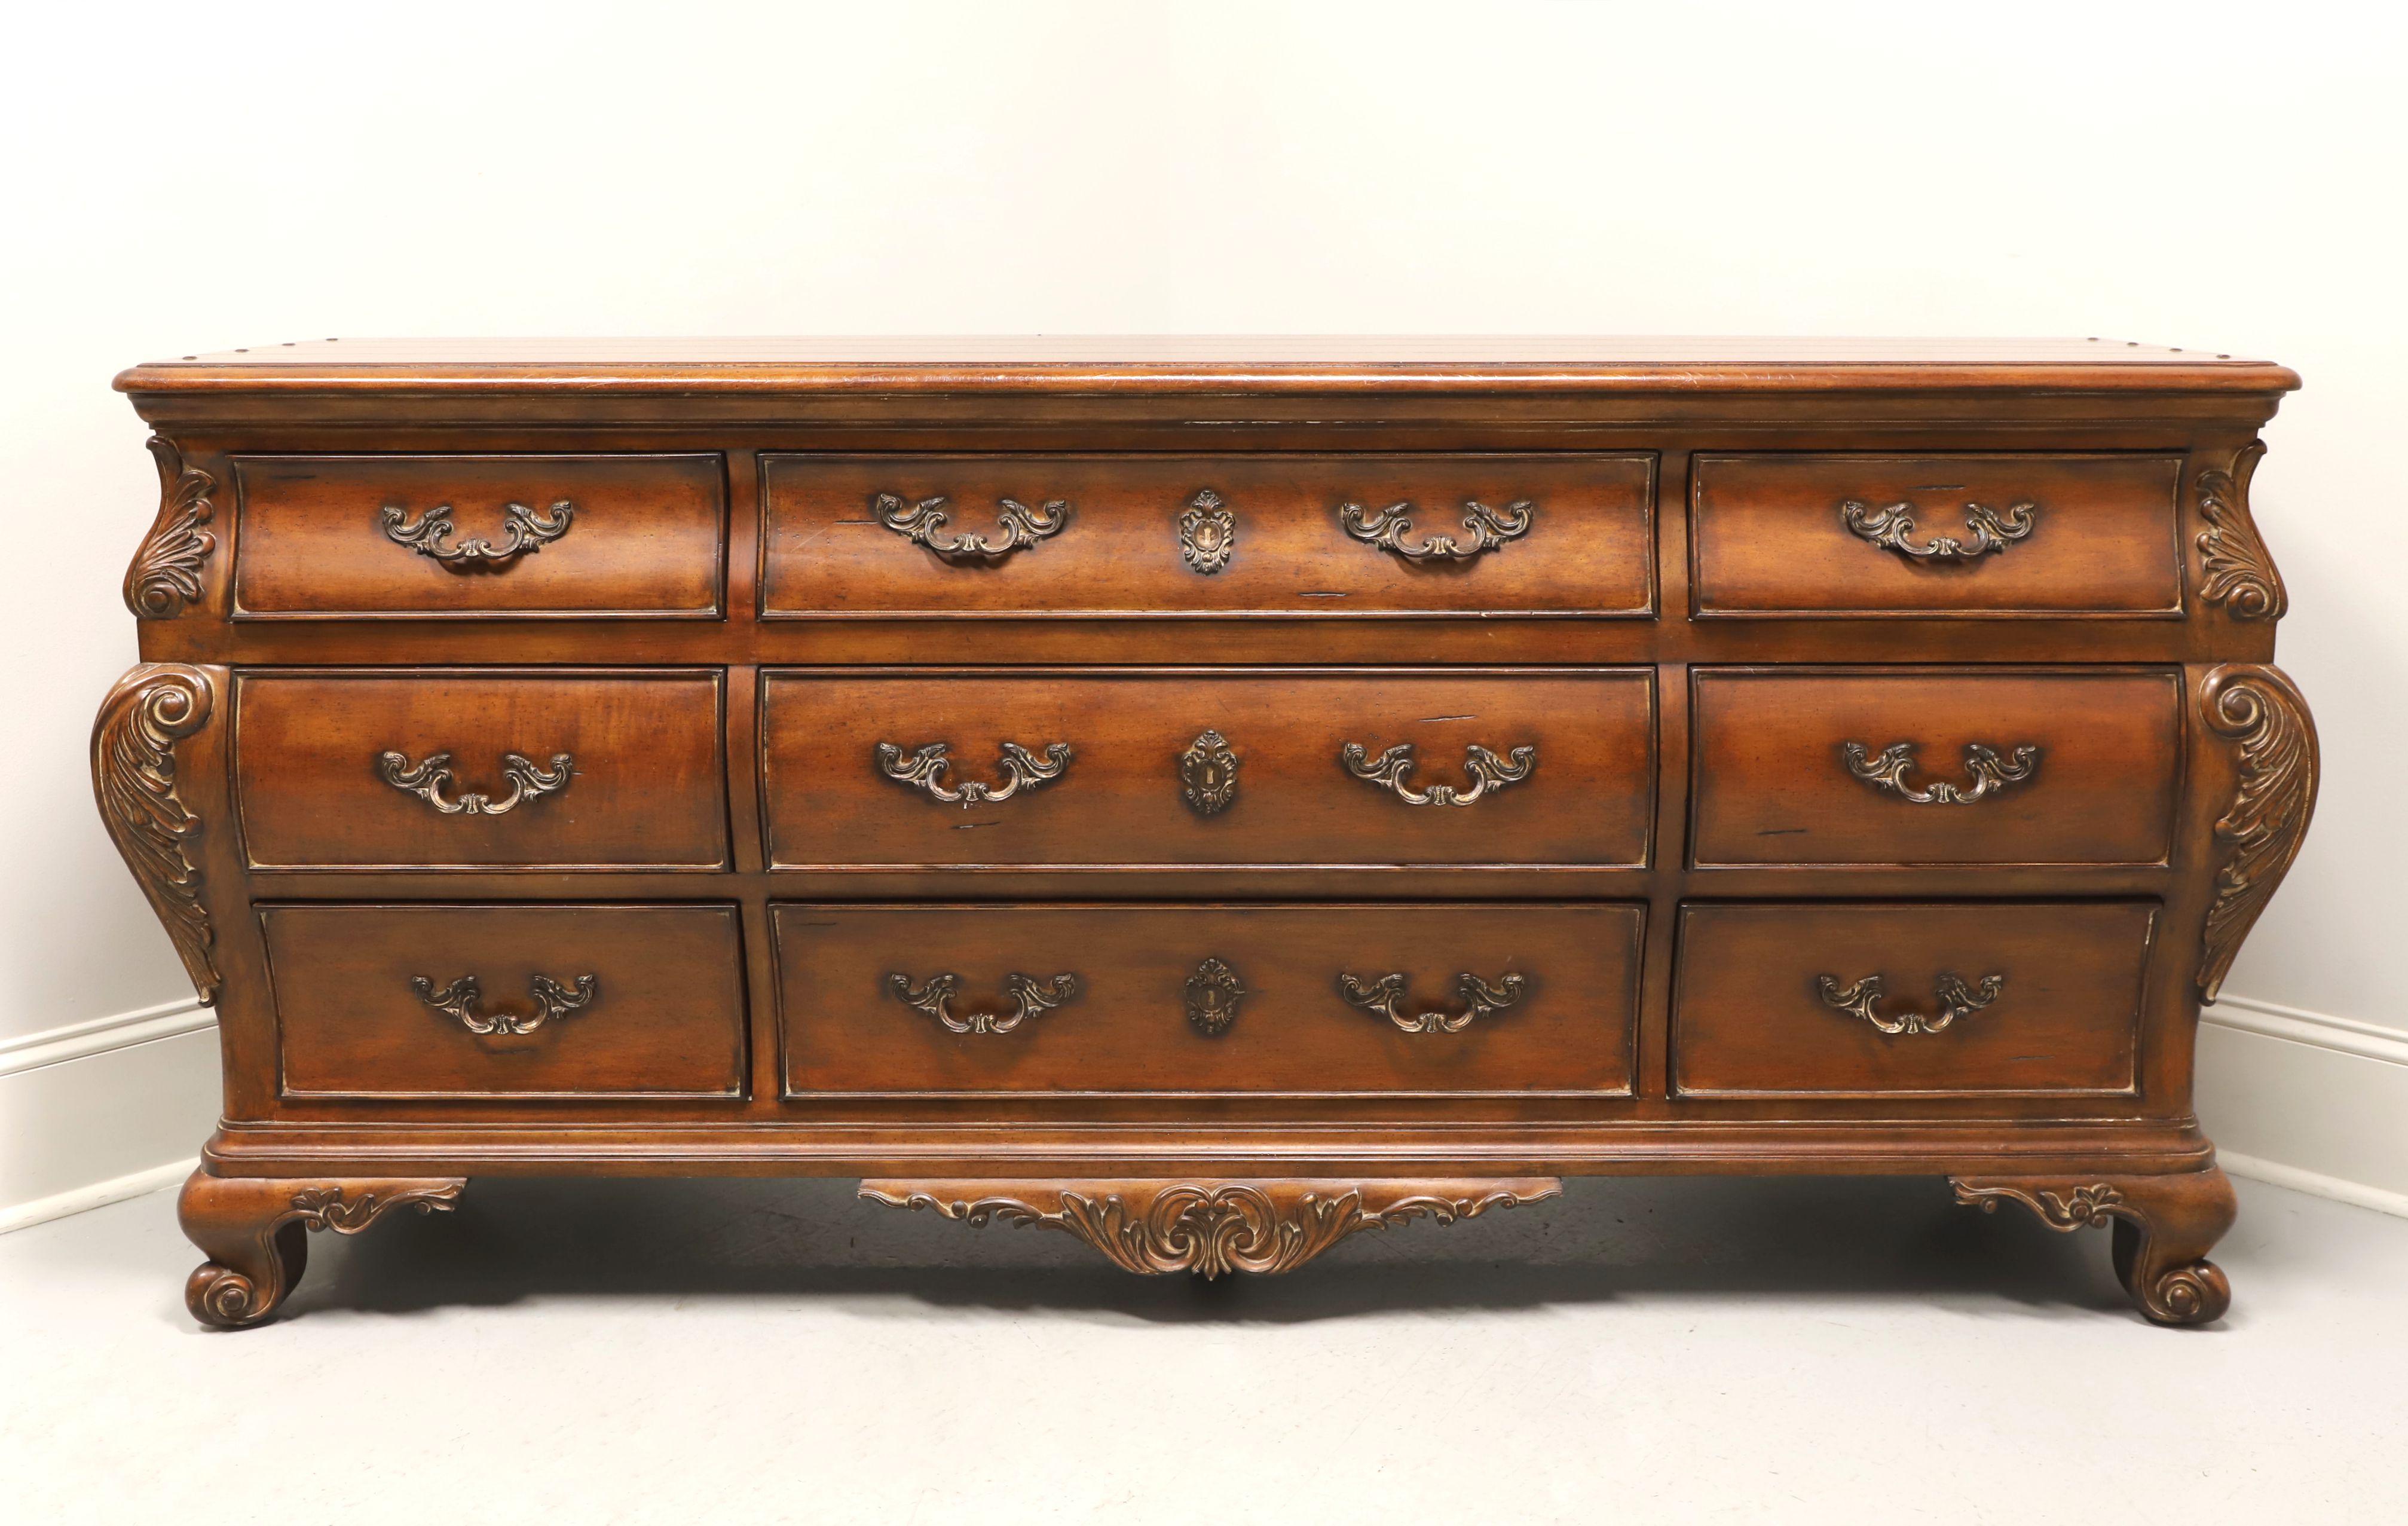 A triple dresser in the French Country style by Thomasville, from their Chateau Provence Collection. Walnut with plank like top, brass hardware, a slightly distressed finish, decoratively carved contoured sides with acanthus leaves, carved apron